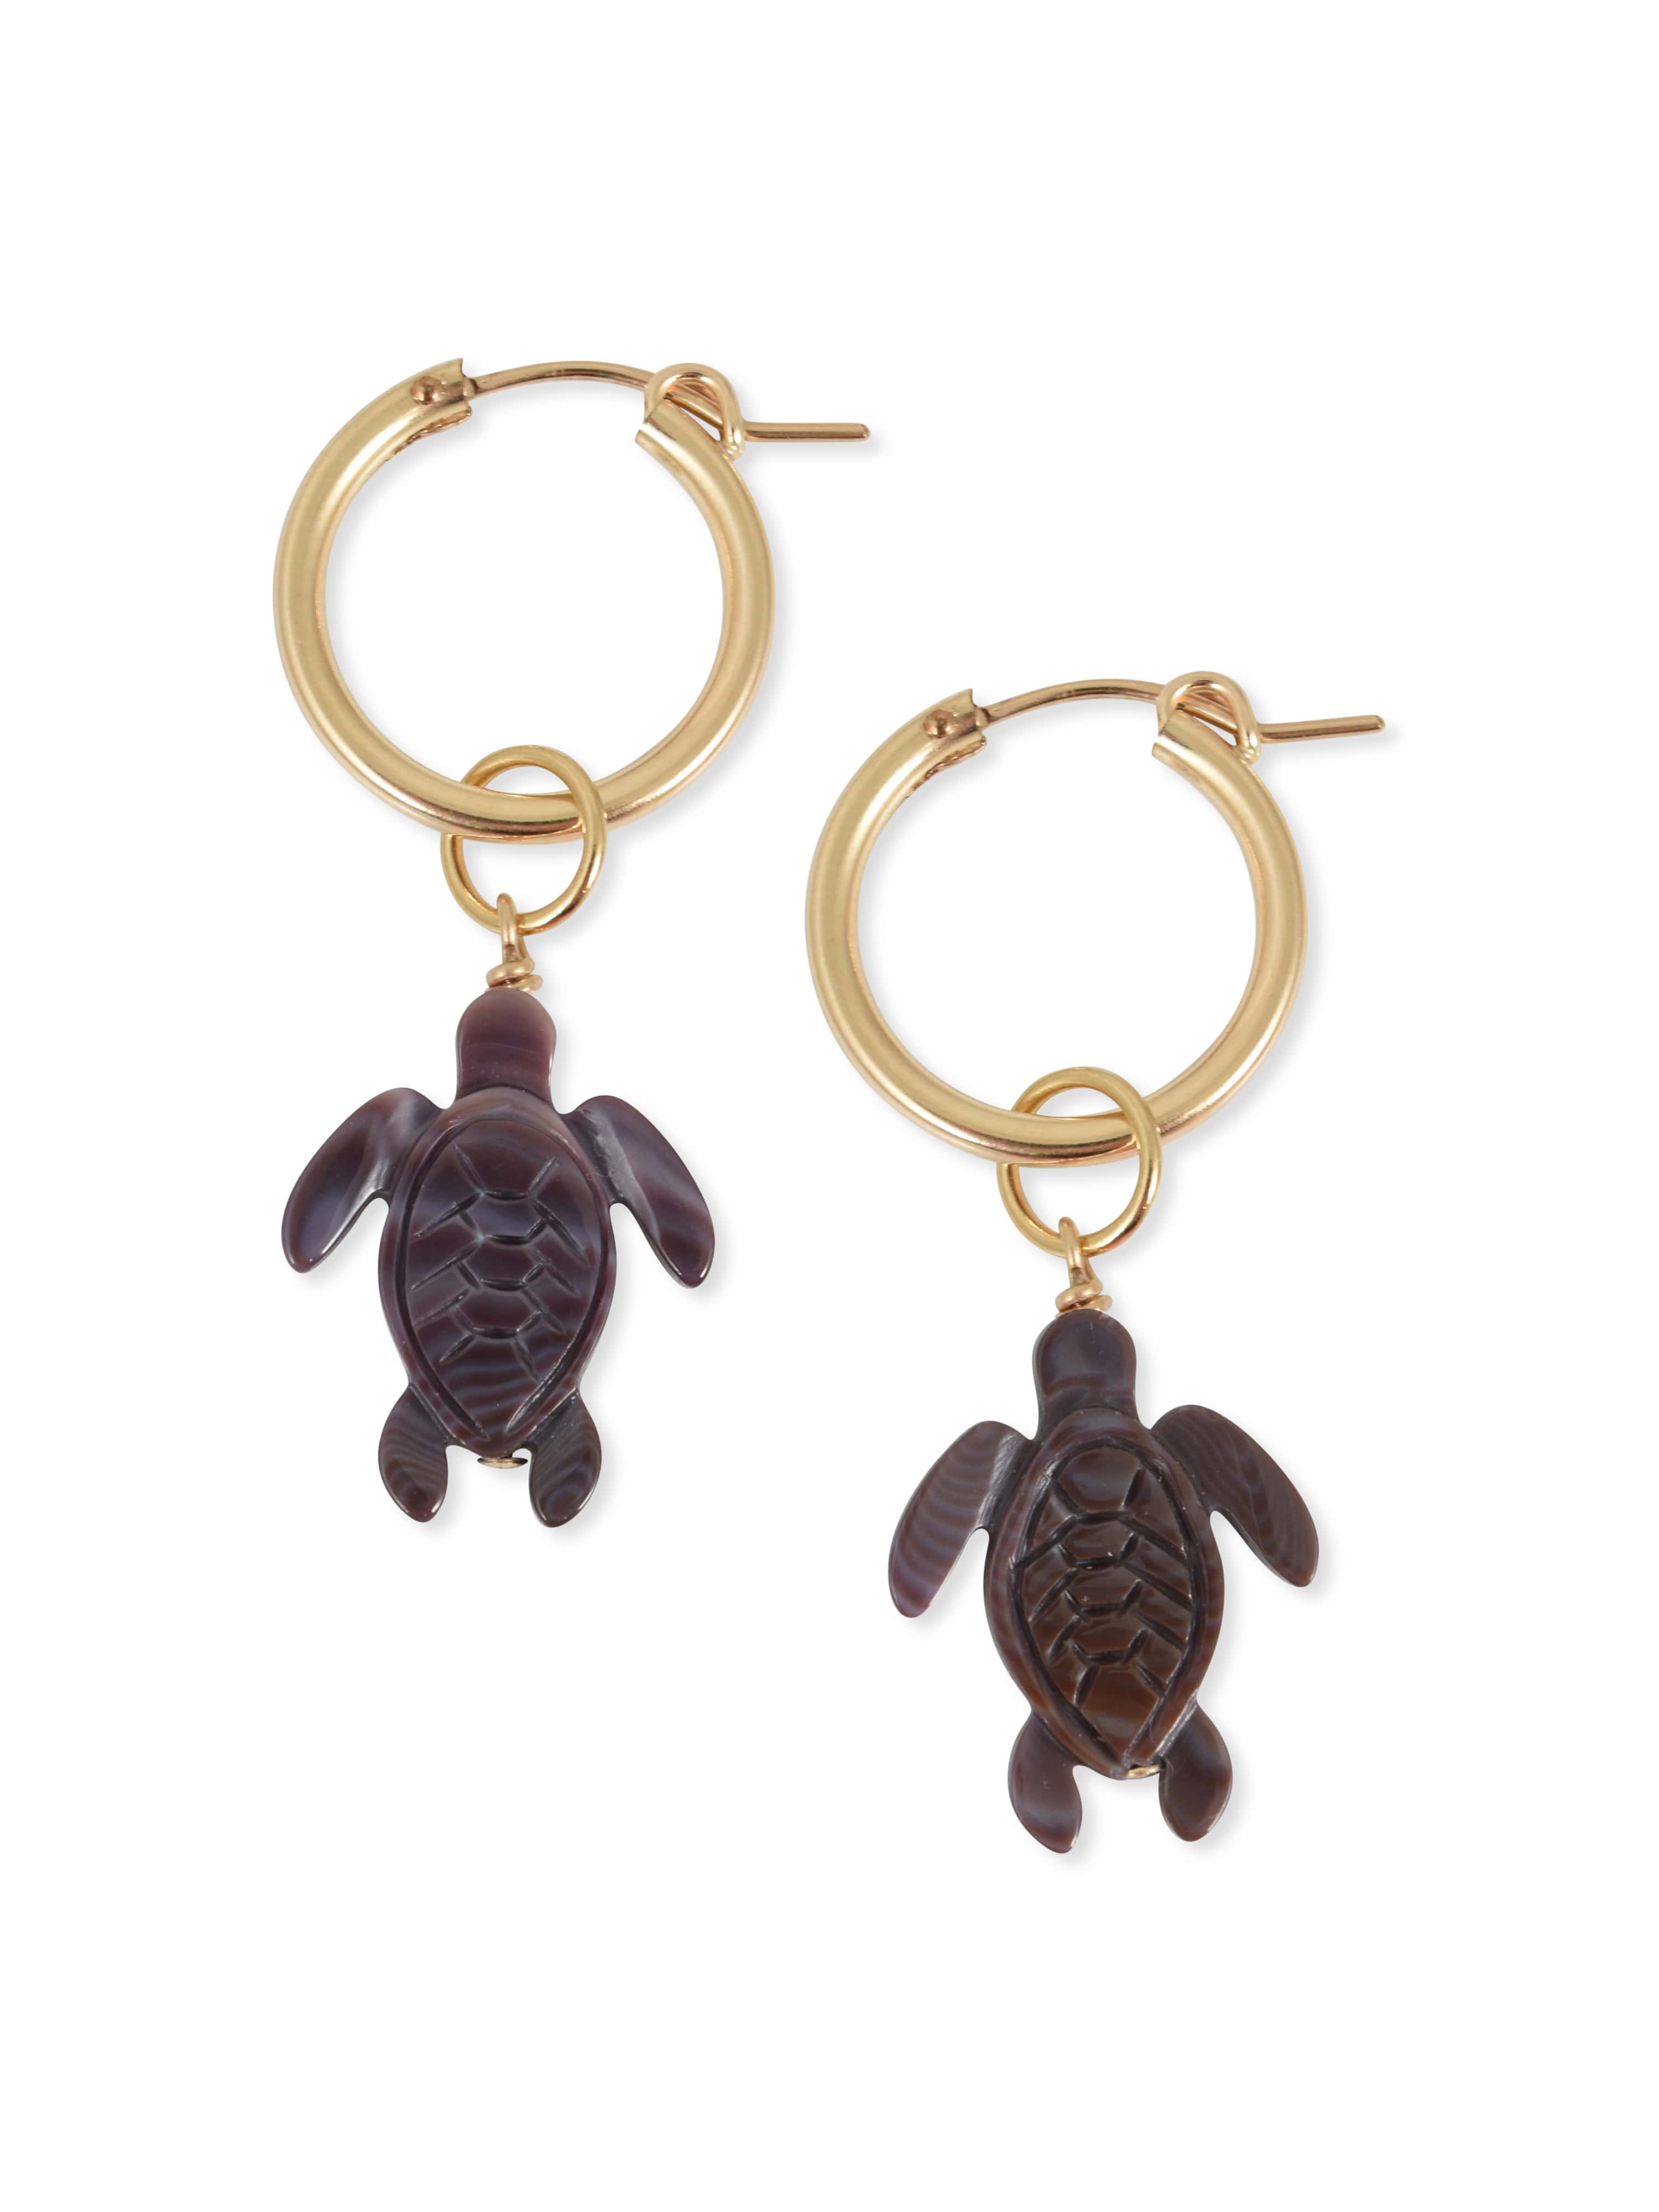 Turtle Charm in Purple Spiny Oyster